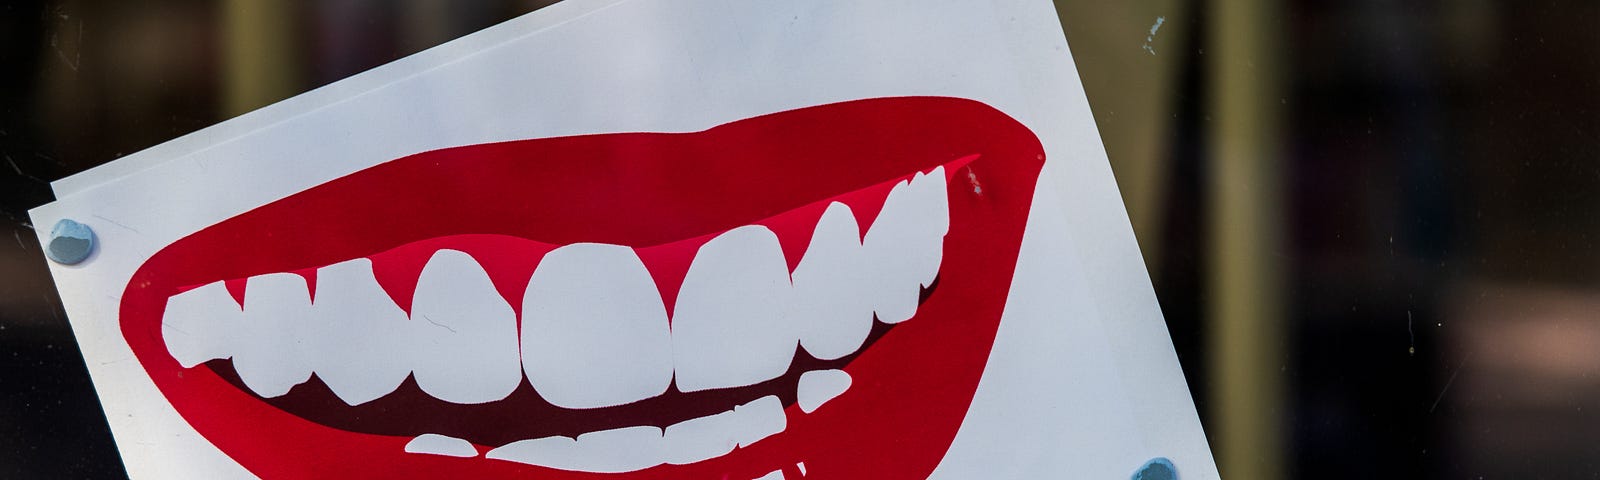 A mouth with red lipstick smiling.